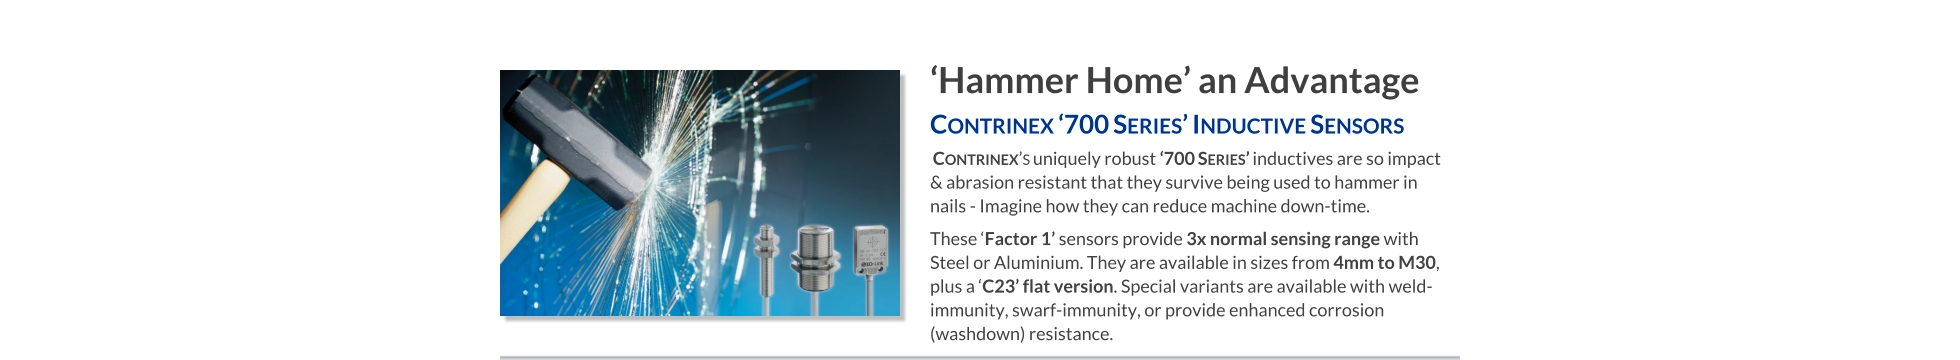 ‘Hammer Home’ an Advantage Contrinex ‘700 Series’ Inductive Sensors    Contrinex’s uniquely robust ‘700 Series’ inductives are so impact & abrasion resistant that they survive being used to hammer in nails - Imagine how they can reduce machine down-time. These ‘Factor 1’ sensors provide 3x normal sensing range with Steel or Aluminium. They are available in sizes from 4mm to M30, plus a ‘C23’ flat version. Special variants are available with weld-immunity, swarf-immunity, or provide enhanced corrosion (washdown) resistance.